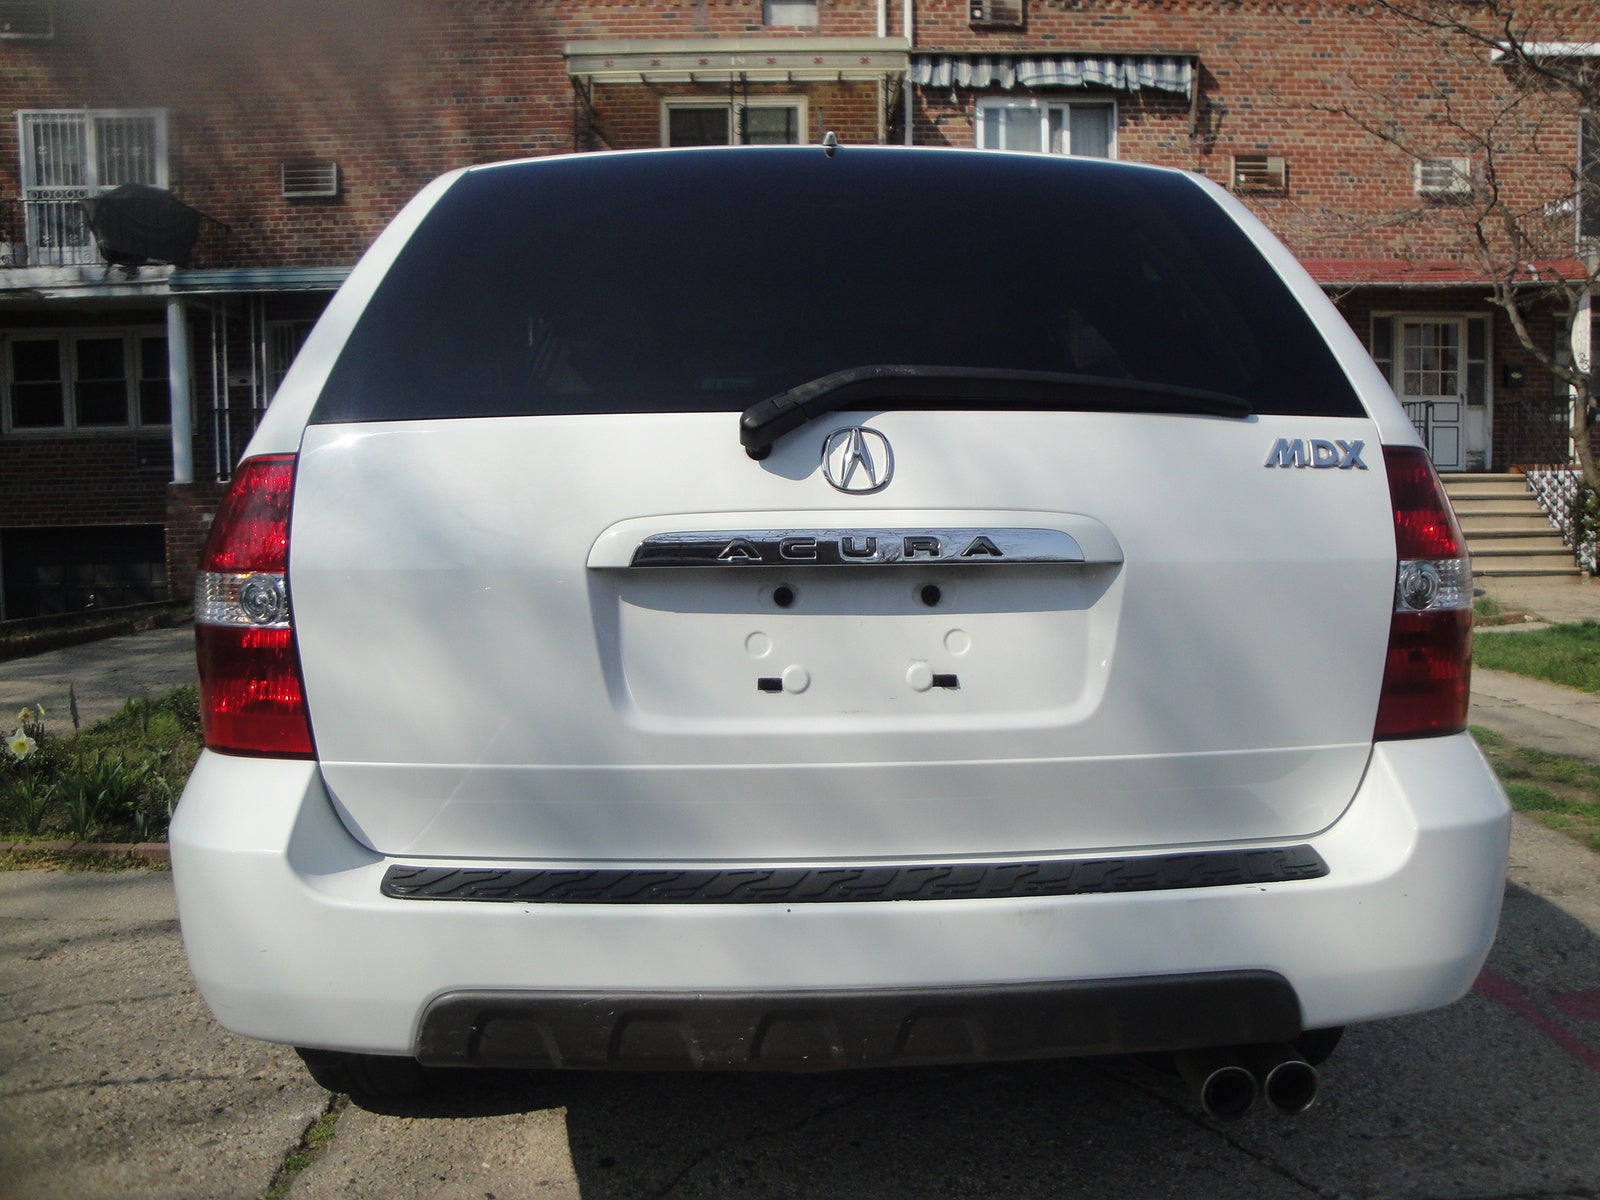 2002 Acura MDX - Pictures - Picture of 2002 Acura MDX Tour ...